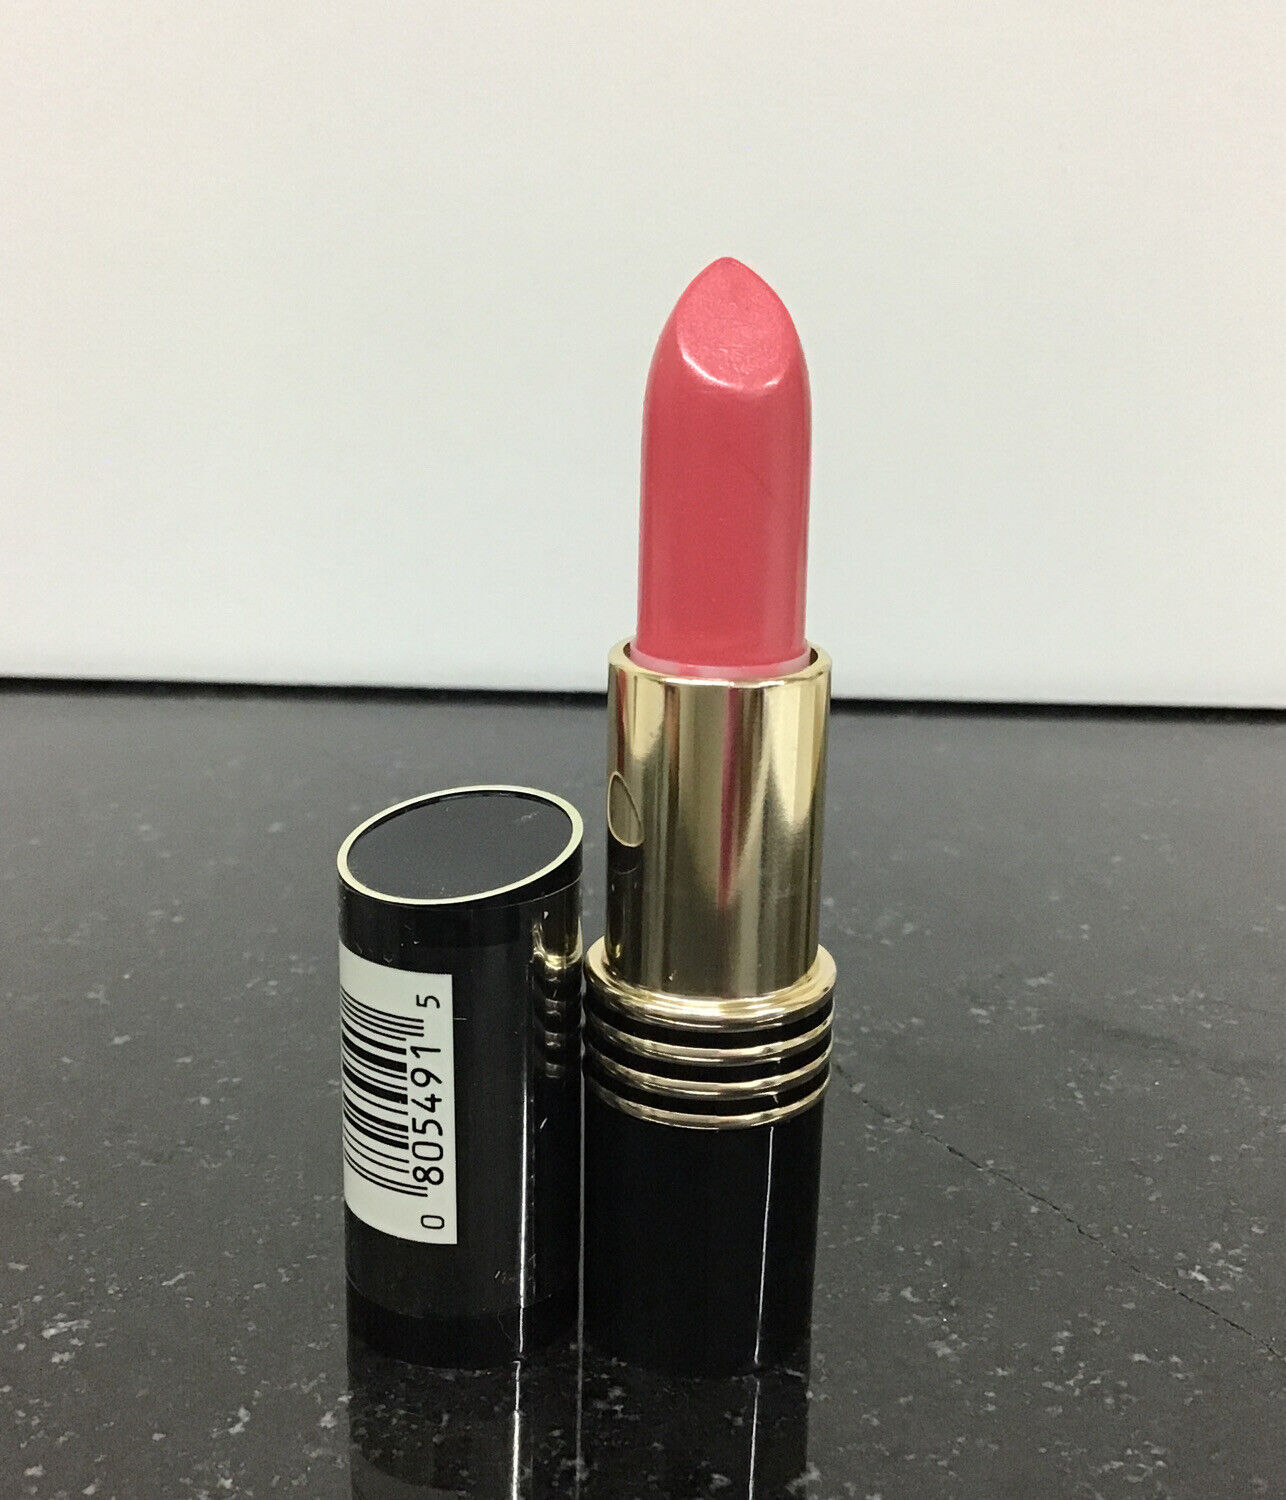 Revlon super lustrous lipstick *49 RED ICE, As pictured